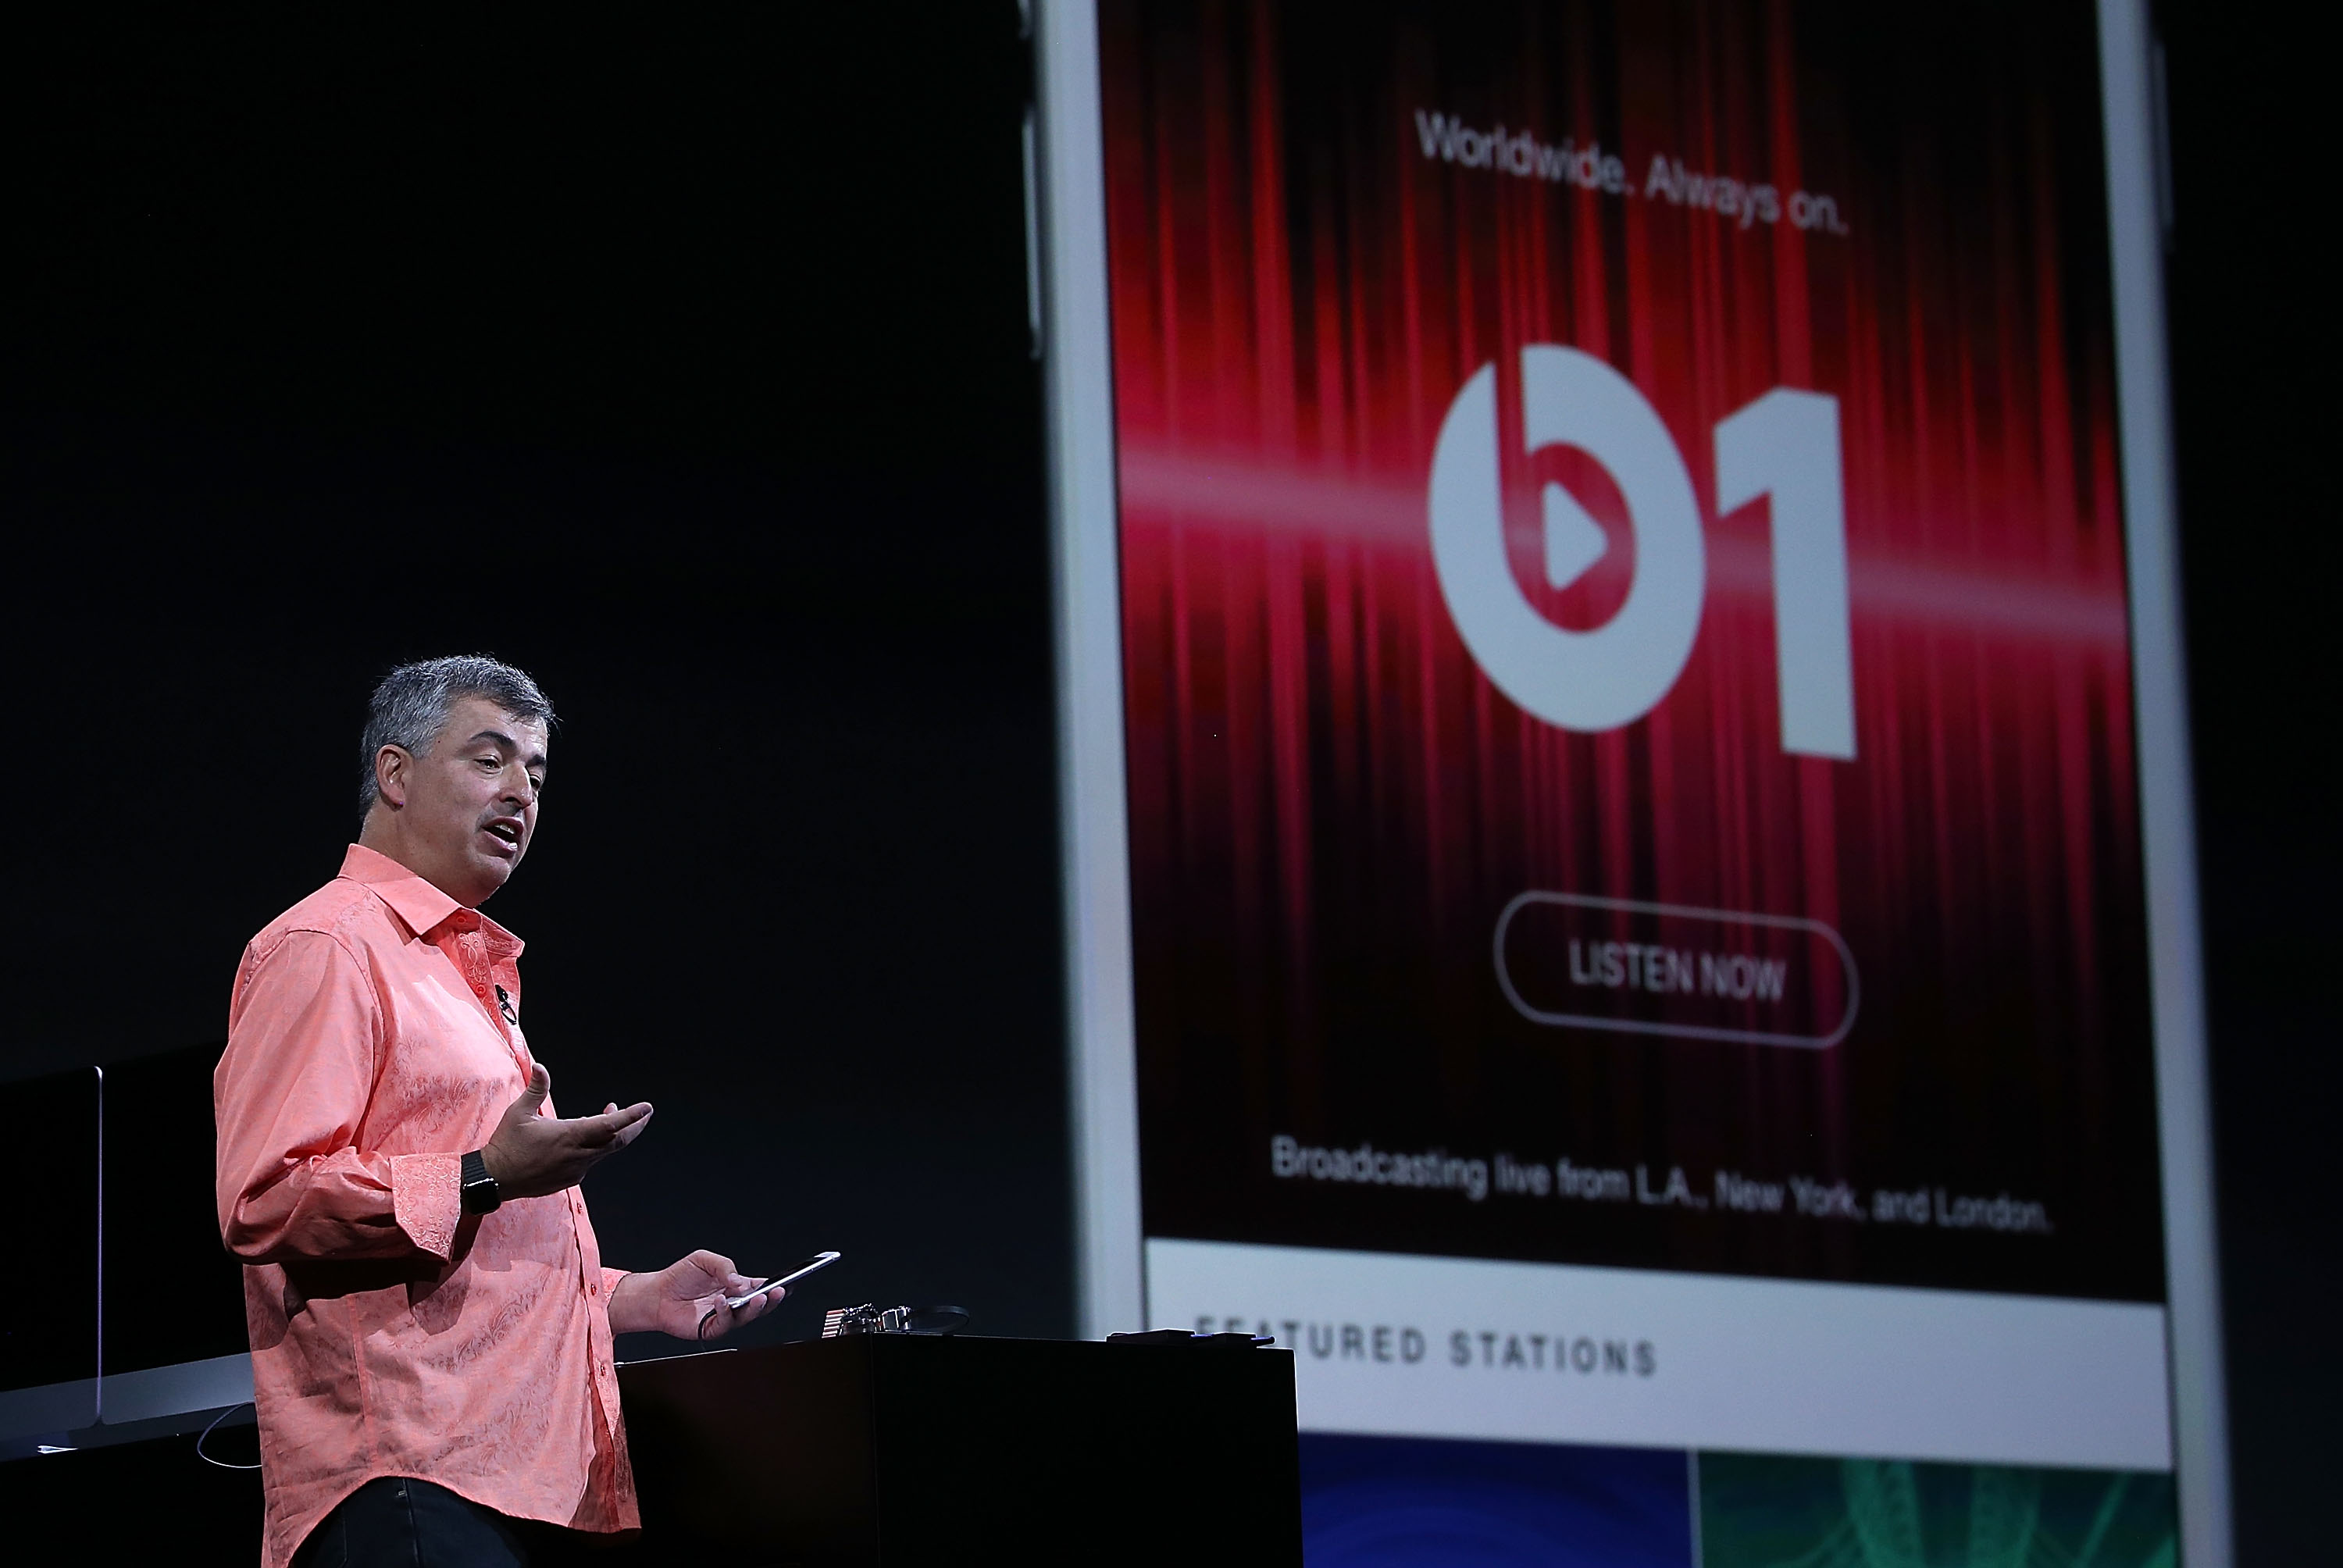 Apple's senior vice president of Internet Software and Services Eddy Cue speaks during the Apple WWDC on June 8, 2015 in San Francisco, California. (Justin Sullivan&mdash;Getty Images)